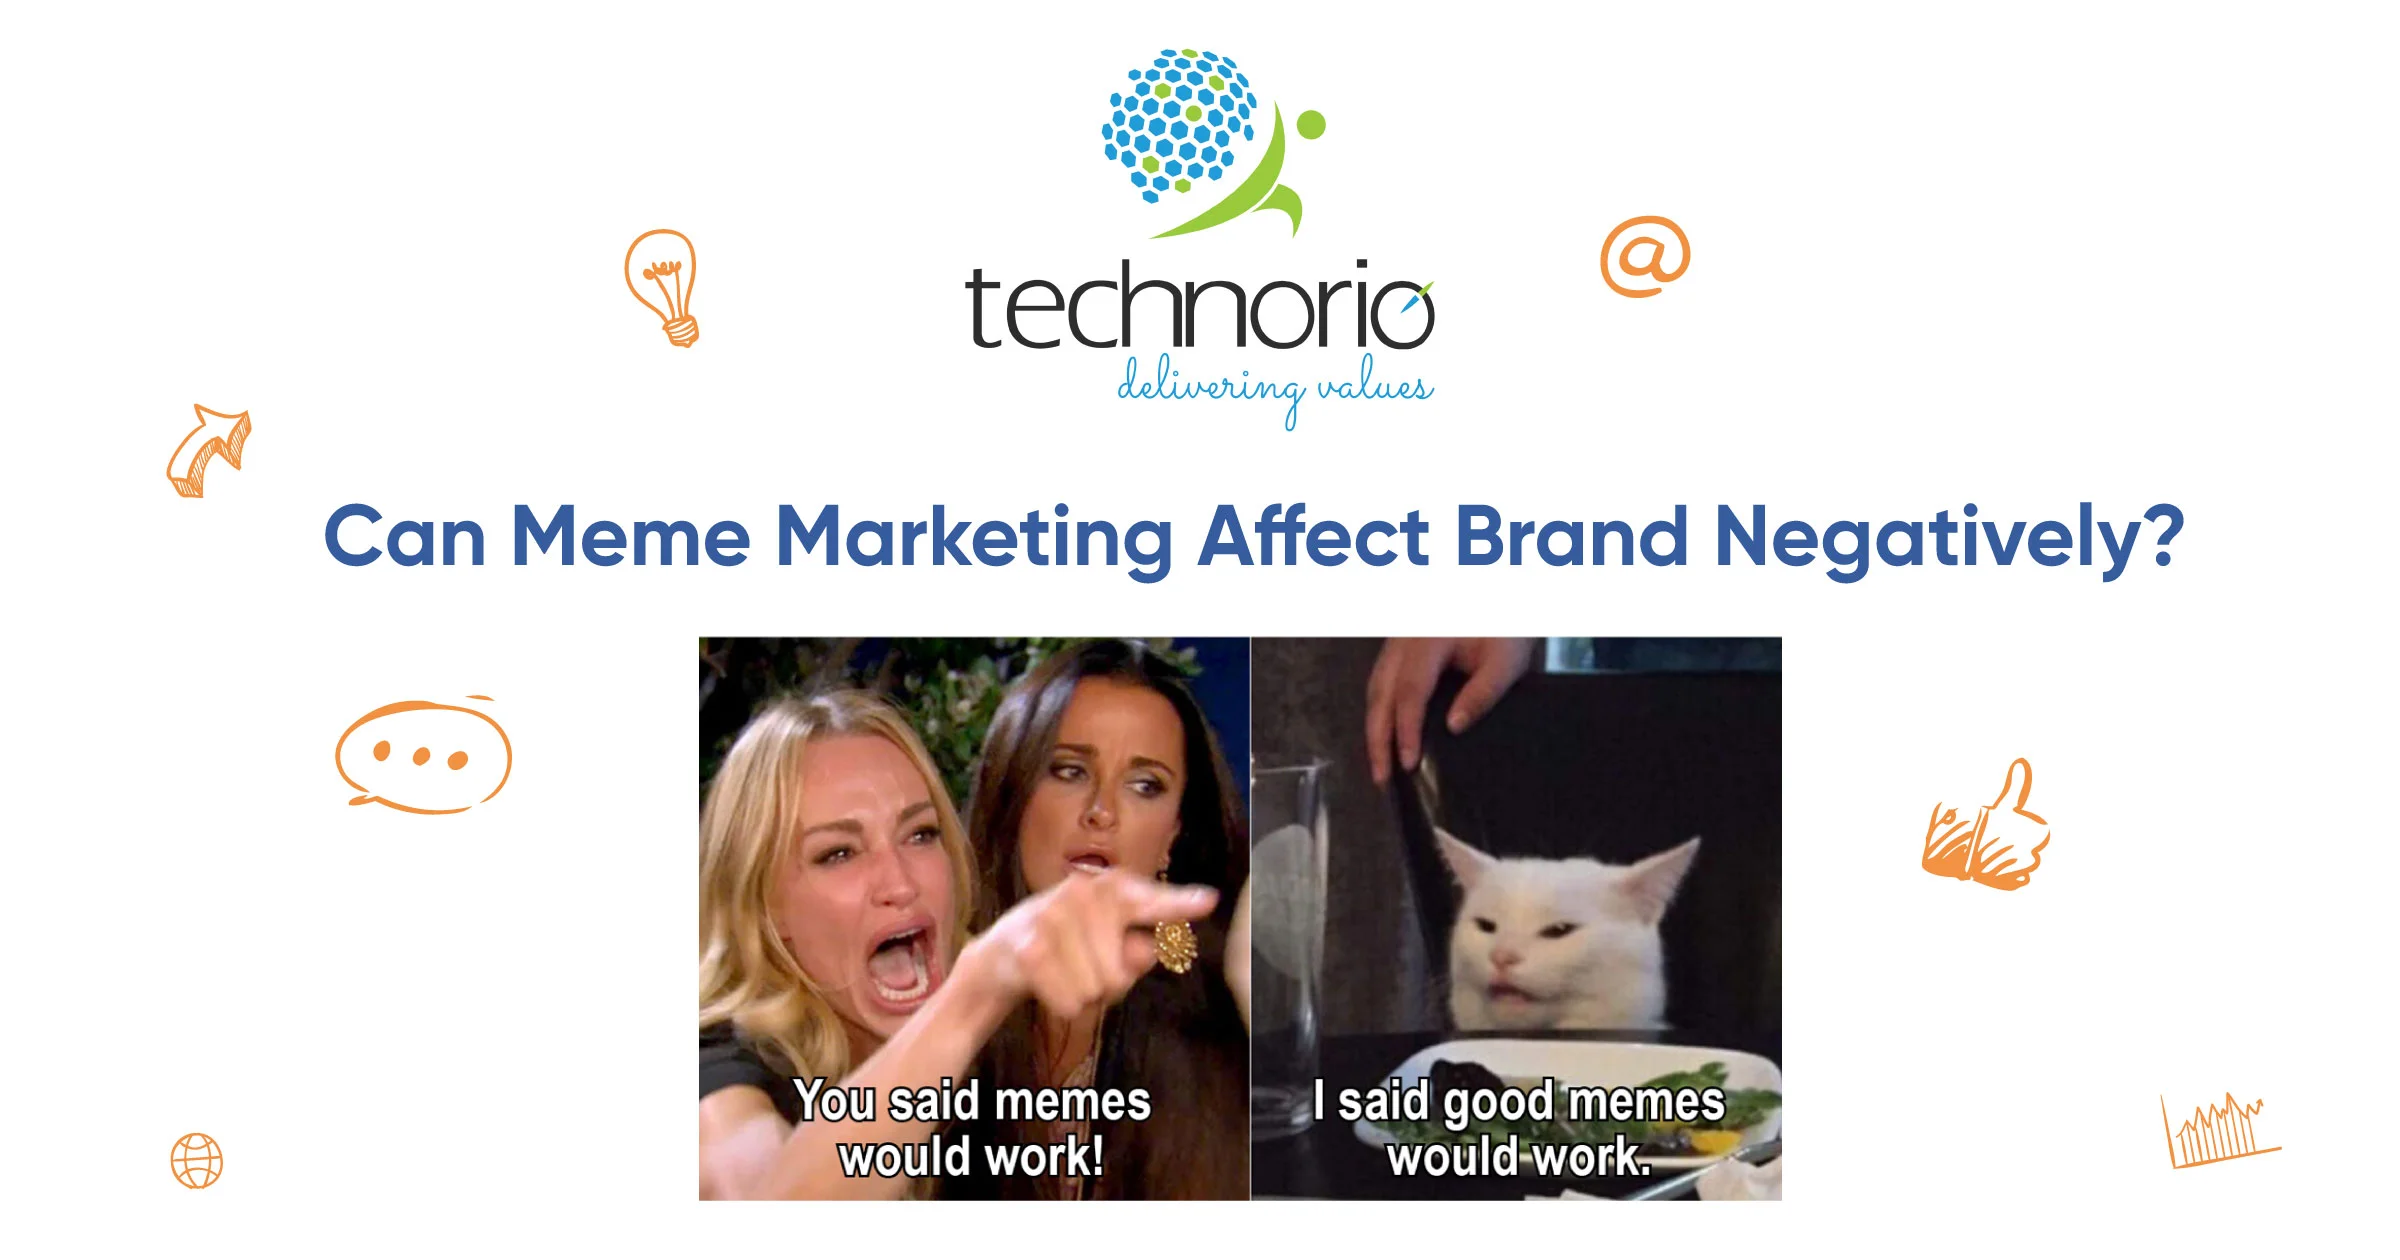 Can meme marketing affect brand negatively?